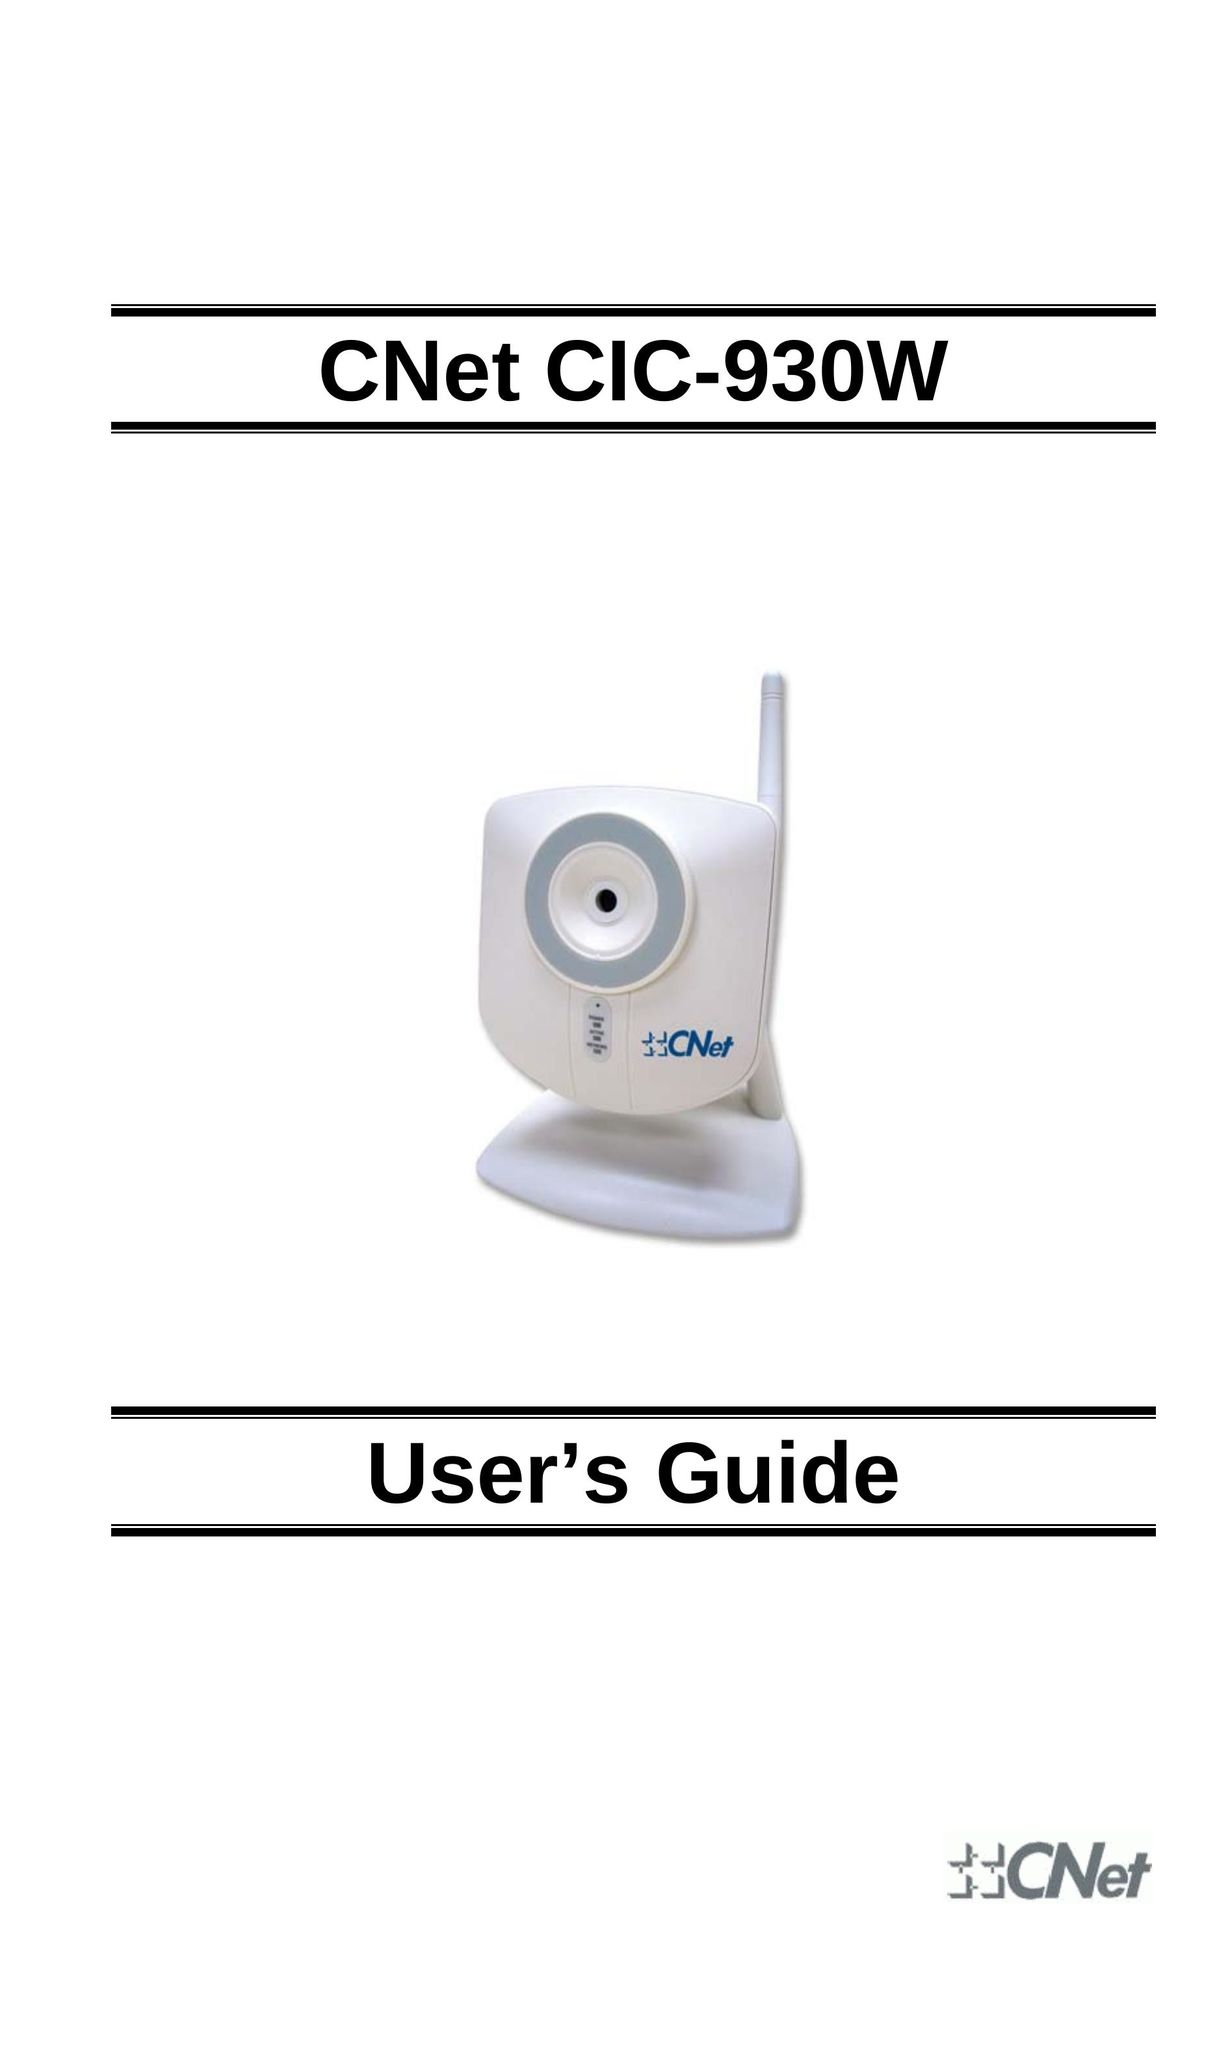 CNET CIC-930W Network Router User Manual